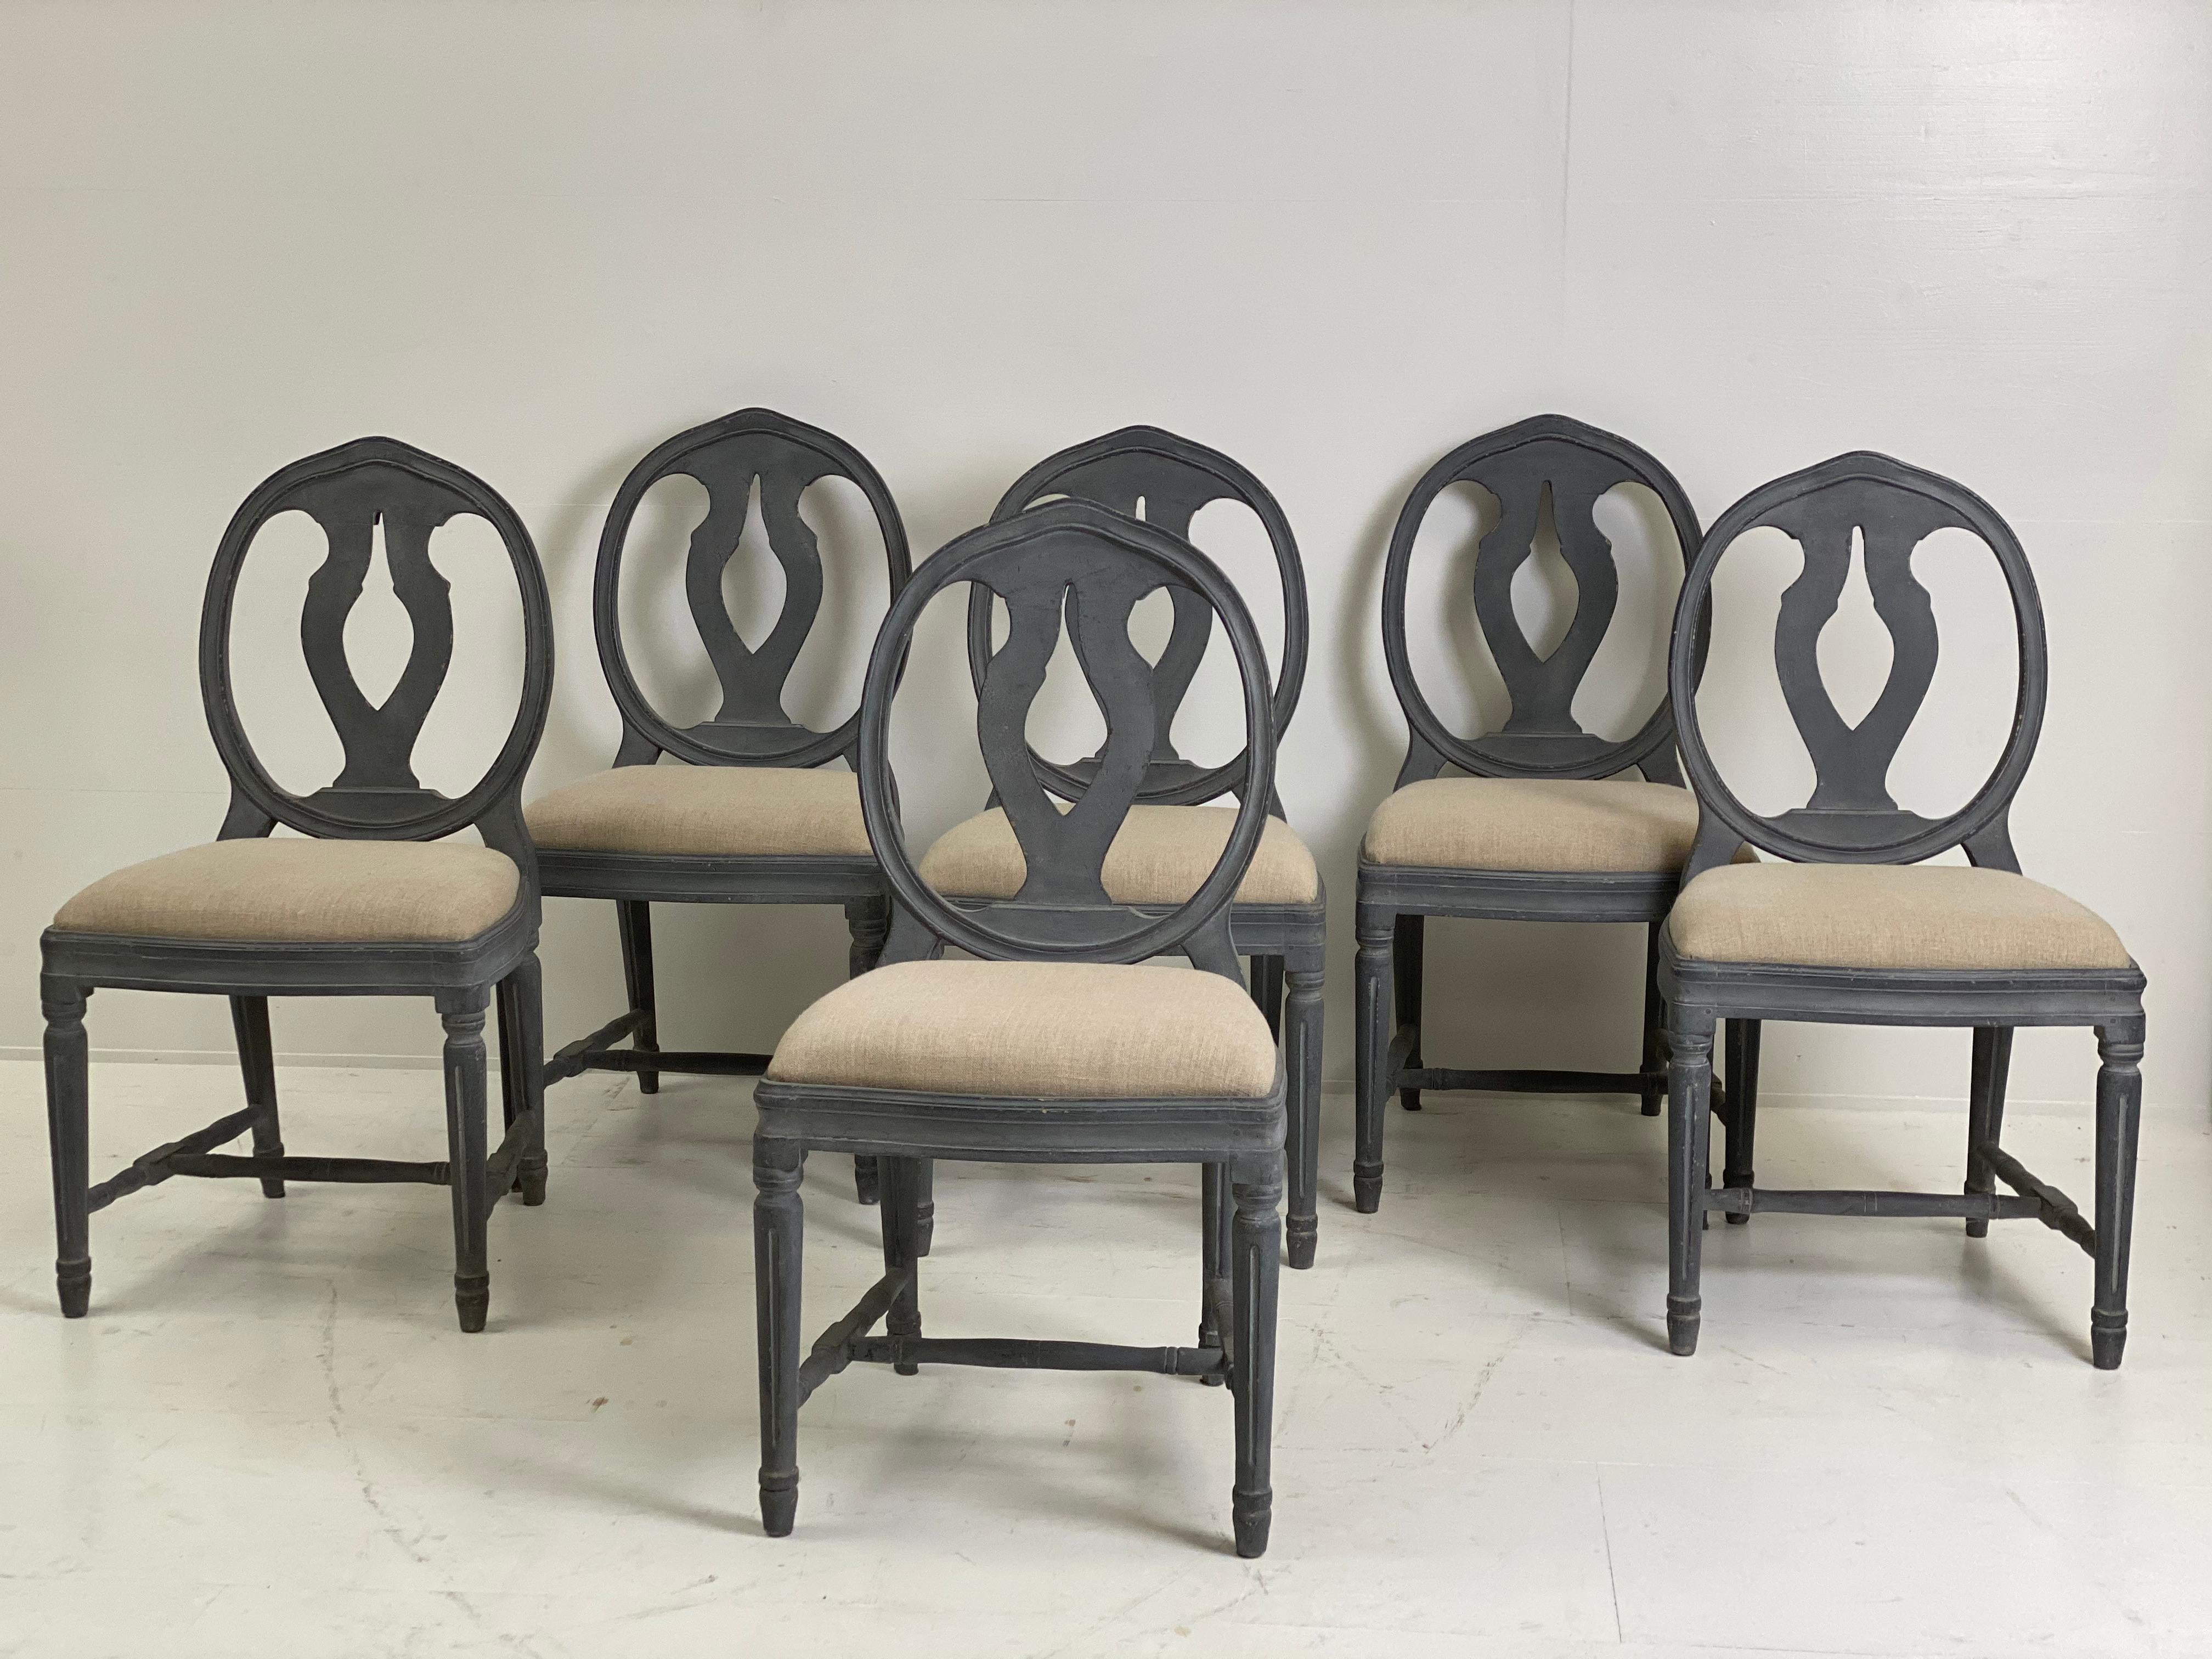 Elegant set of 6 Swedish patinated chairs in a Blue/Grey Color,
comfortable seating, nice round back and classical stretchers,
Gustavian Style,
seating upholstered with a beige fabric